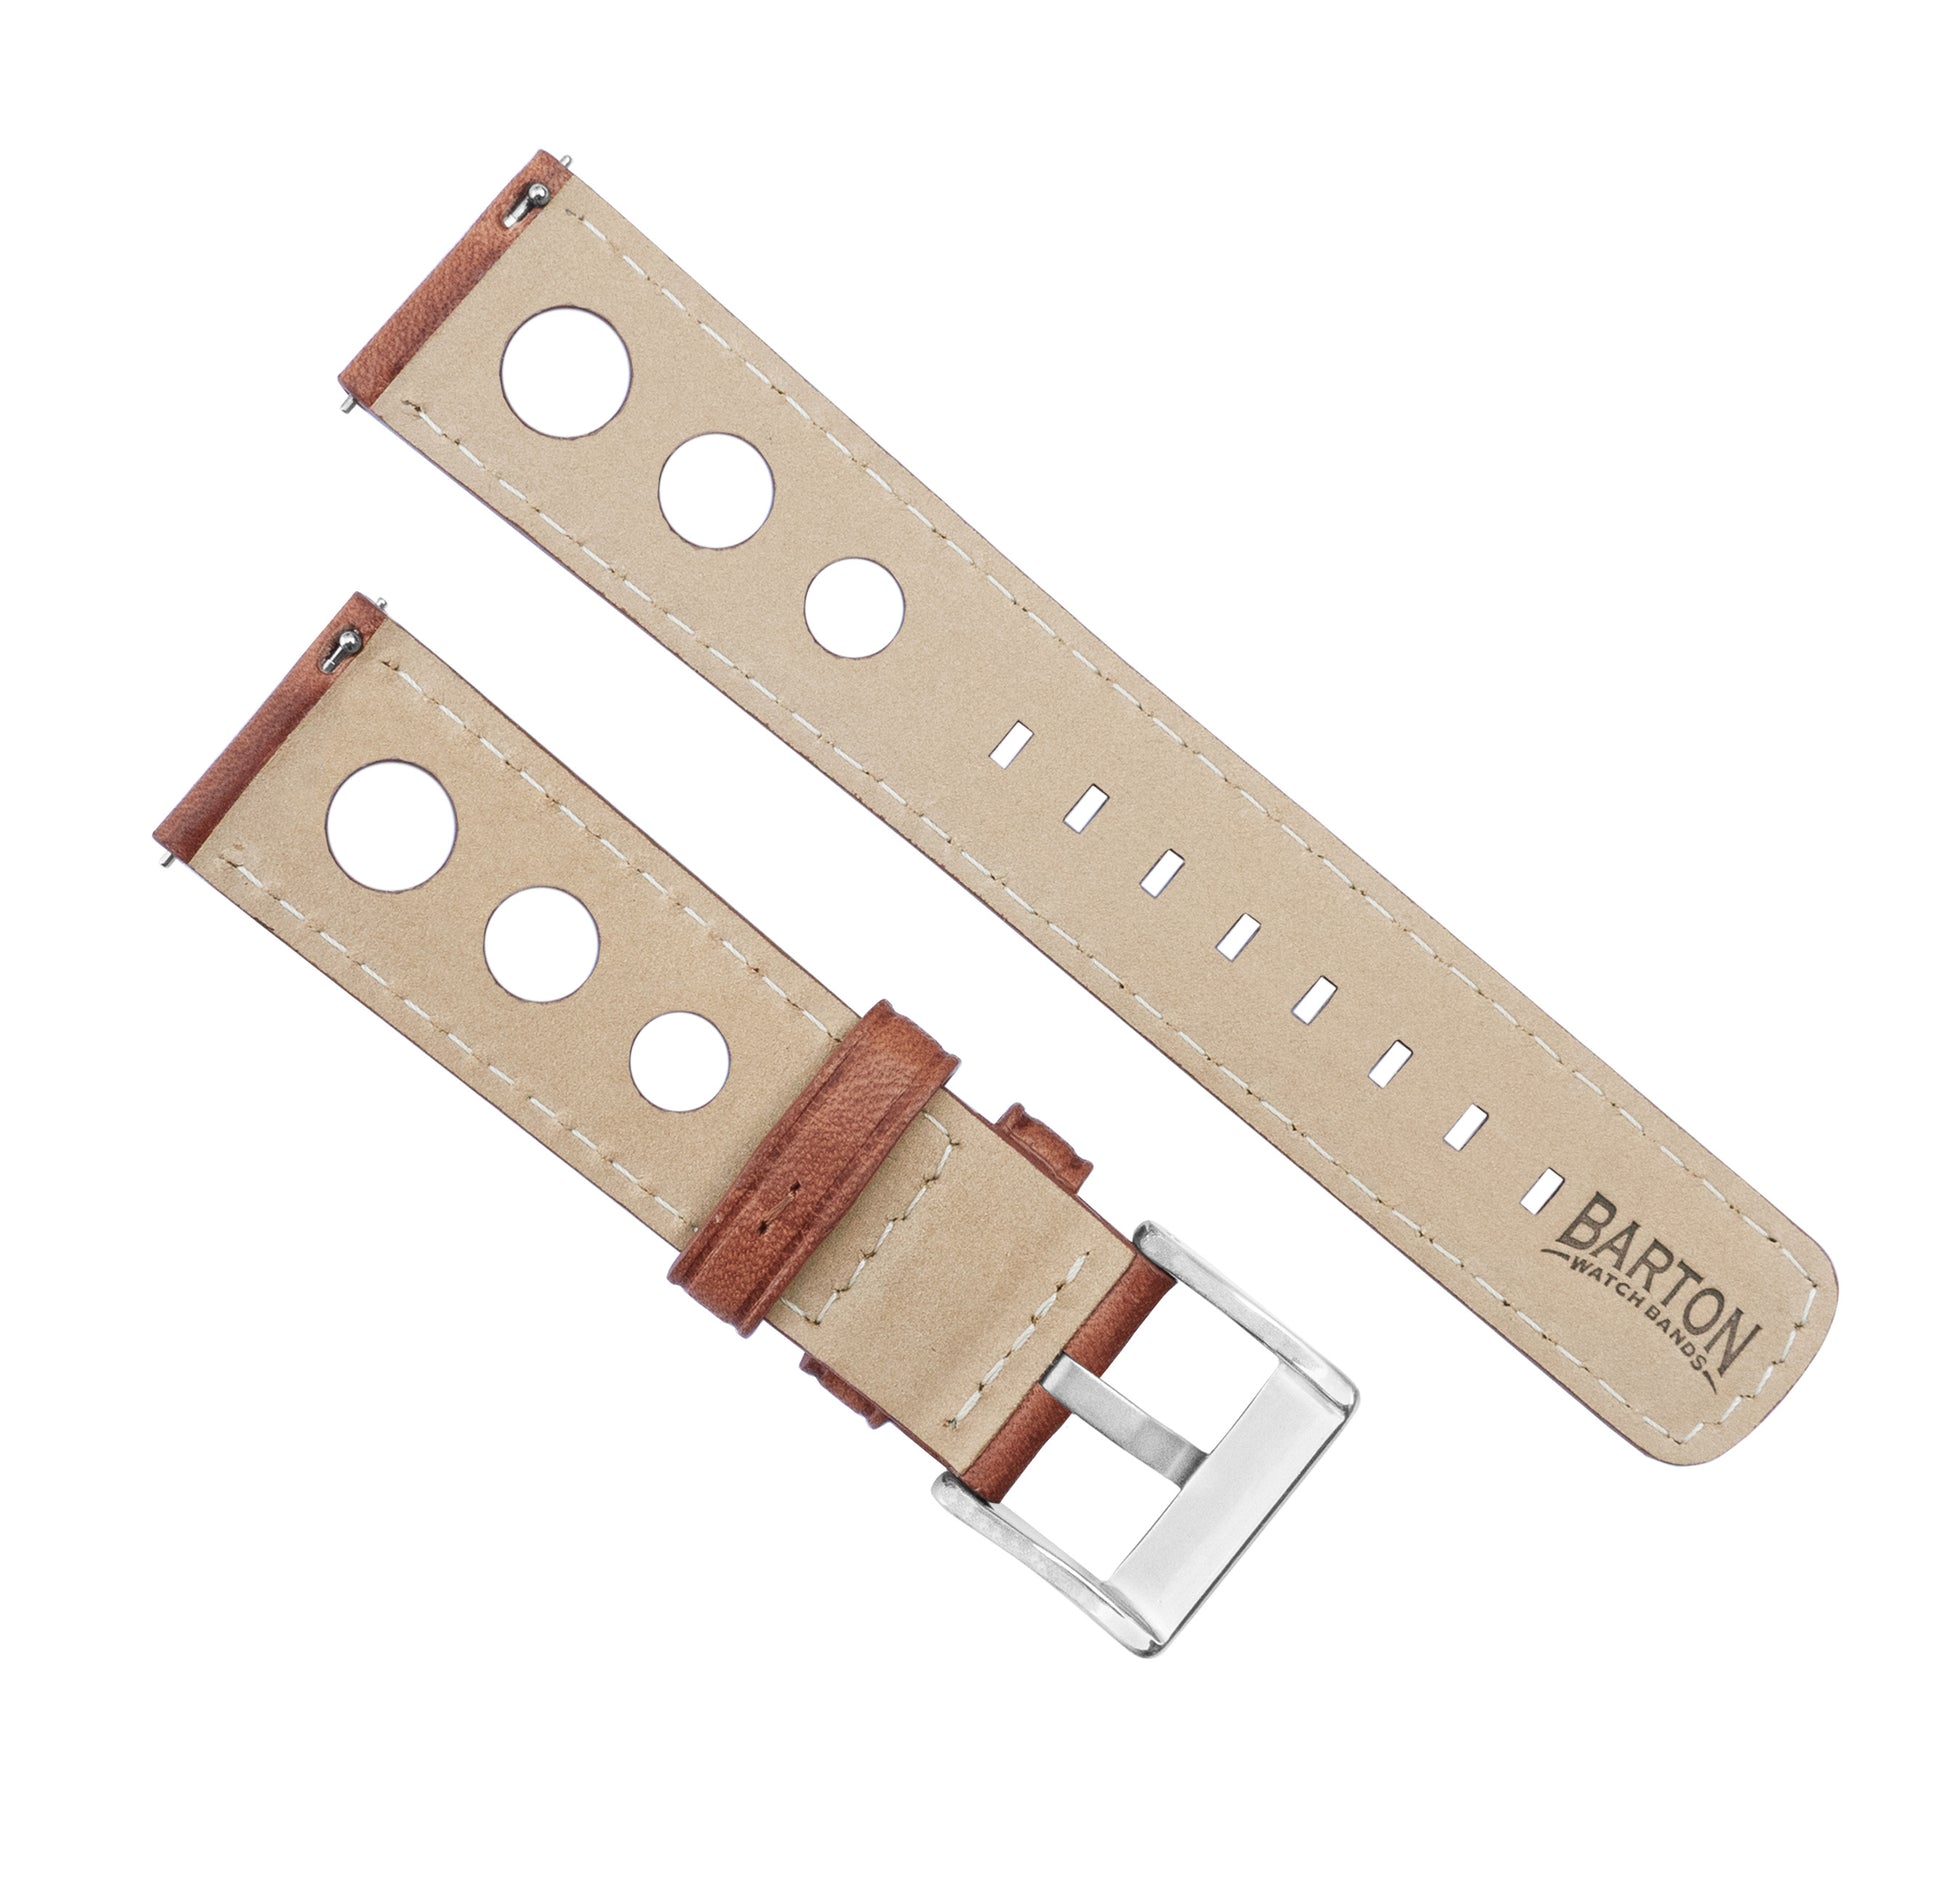 Fossil Gen 5 | Rally Horween Leather | Caramel Brown - Barton Watch Bands